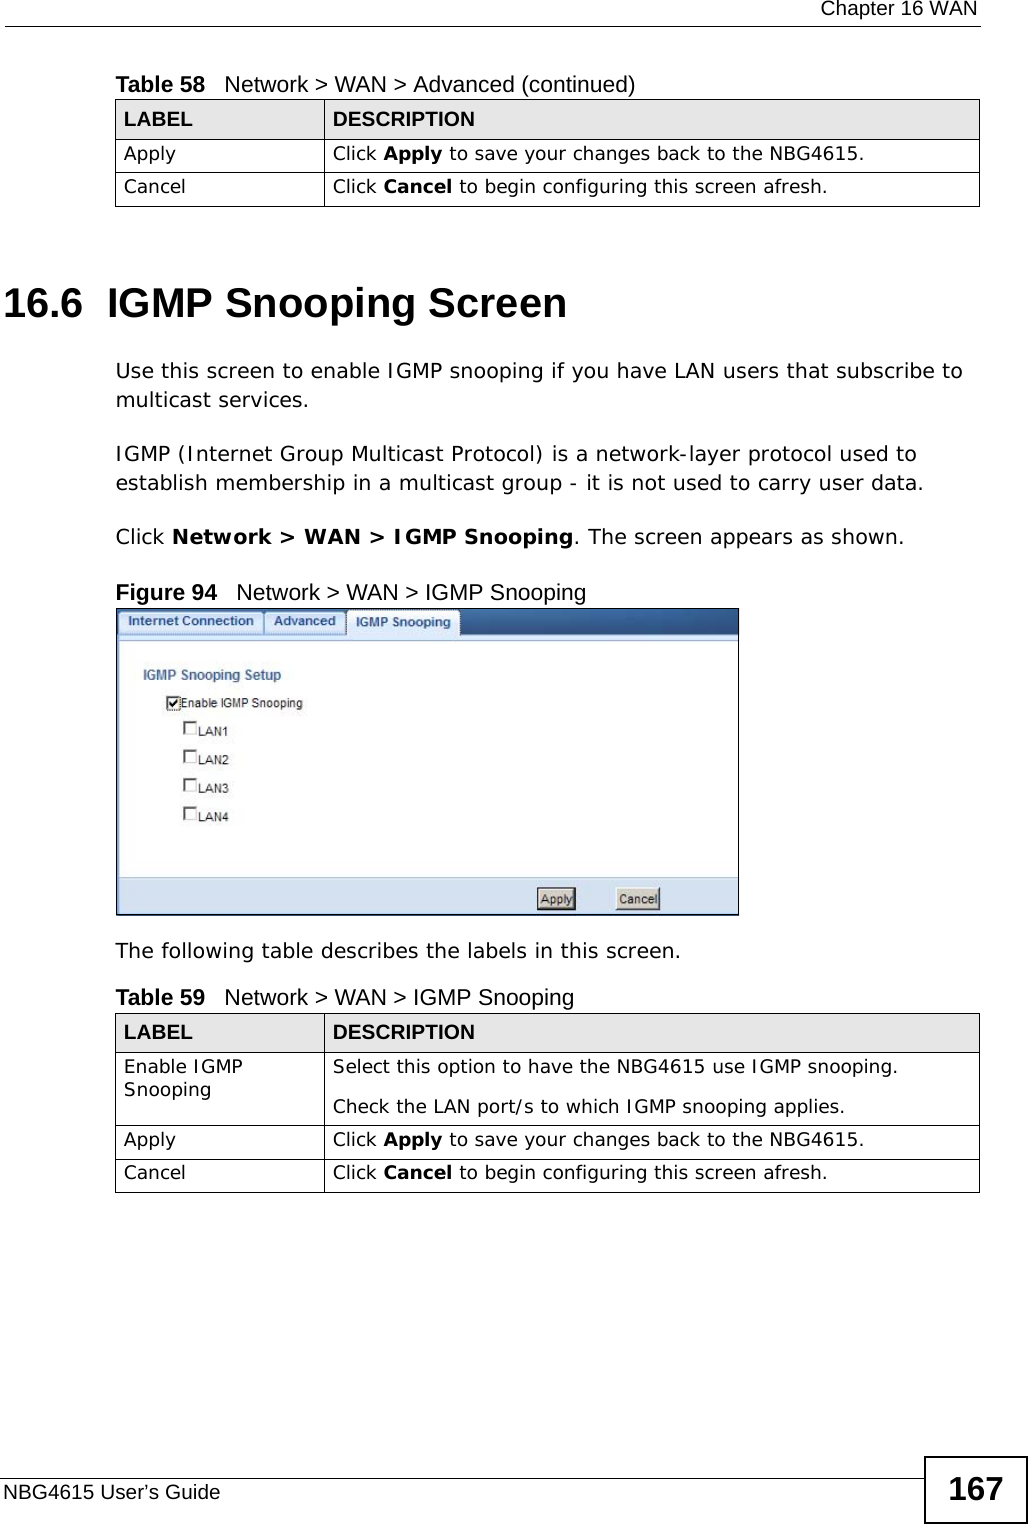  Chapter 16 WANNBG4615 User’s Guide 16716.6  IGMP Snooping ScreenUse this screen to enable IGMP snooping if you have LAN users that subscribe to multicast services.IGMP (Internet Group Multicast Protocol) is a network-layer protocol used to establish membership in a multicast group - it is not used to carry user data.Click Network &gt; WAN &gt; IGMP Snooping. The screen appears as shown.Figure 94   Network &gt; WAN &gt; IGMP Snooping The following table describes the labels in this screen.Apply Click Apply to save your changes back to the NBG4615.Cancel Click Cancel to begin configuring this screen afresh.Table 58   Network &gt; WAN &gt; Advanced (continued)LABEL DESCRIPTIONTable 59   Network &gt; WAN &gt; IGMP SnoopingLABEL DESCRIPTIONEnable IGMP Snooping Select this option to have the NBG4615 use IGMP snooping. Check the LAN port/s to which IGMP snooping applies. Apply Click Apply to save your changes back to the NBG4615.Cancel Click Cancel to begin configuring this screen afresh.